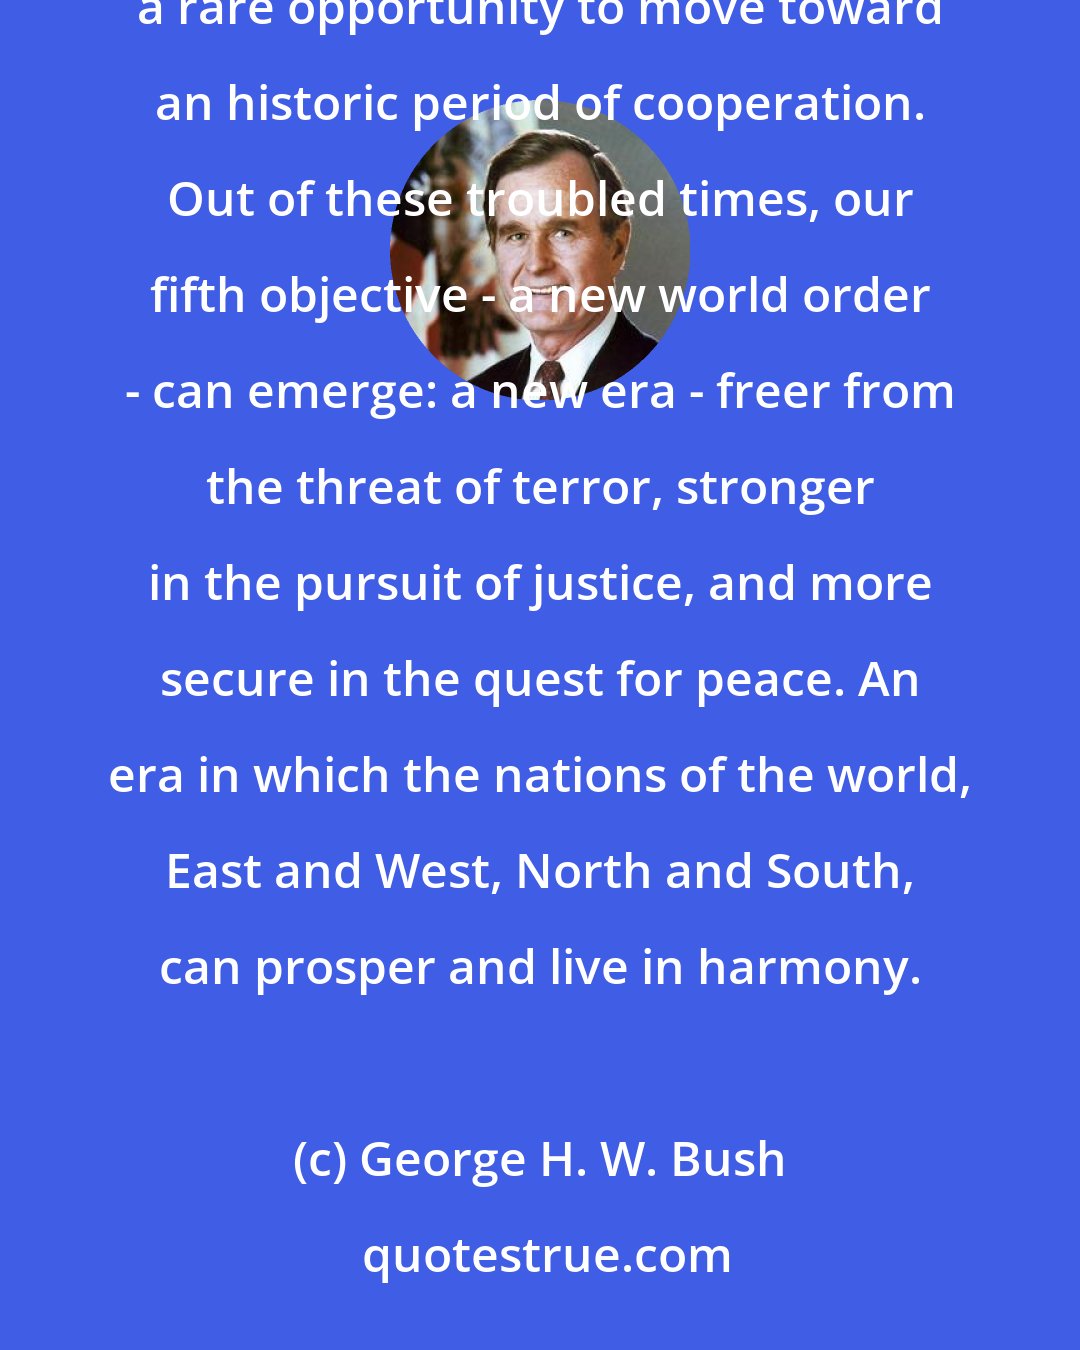 George H. W. Bush: We stand today at a unique and extraordinary moment. The crisis in the Persian Gulf , as grave as it is, also offers a rare opportunity to move toward an historic period of cooperation. Out of these troubled times, our fifth objective - a new world order - can emerge: a new era - freer from the threat of terror, stronger in the pursuit of justice, and more secure in the quest for peace. An era in which the nations of the world, East and West, North and South, can prosper and live in harmony.